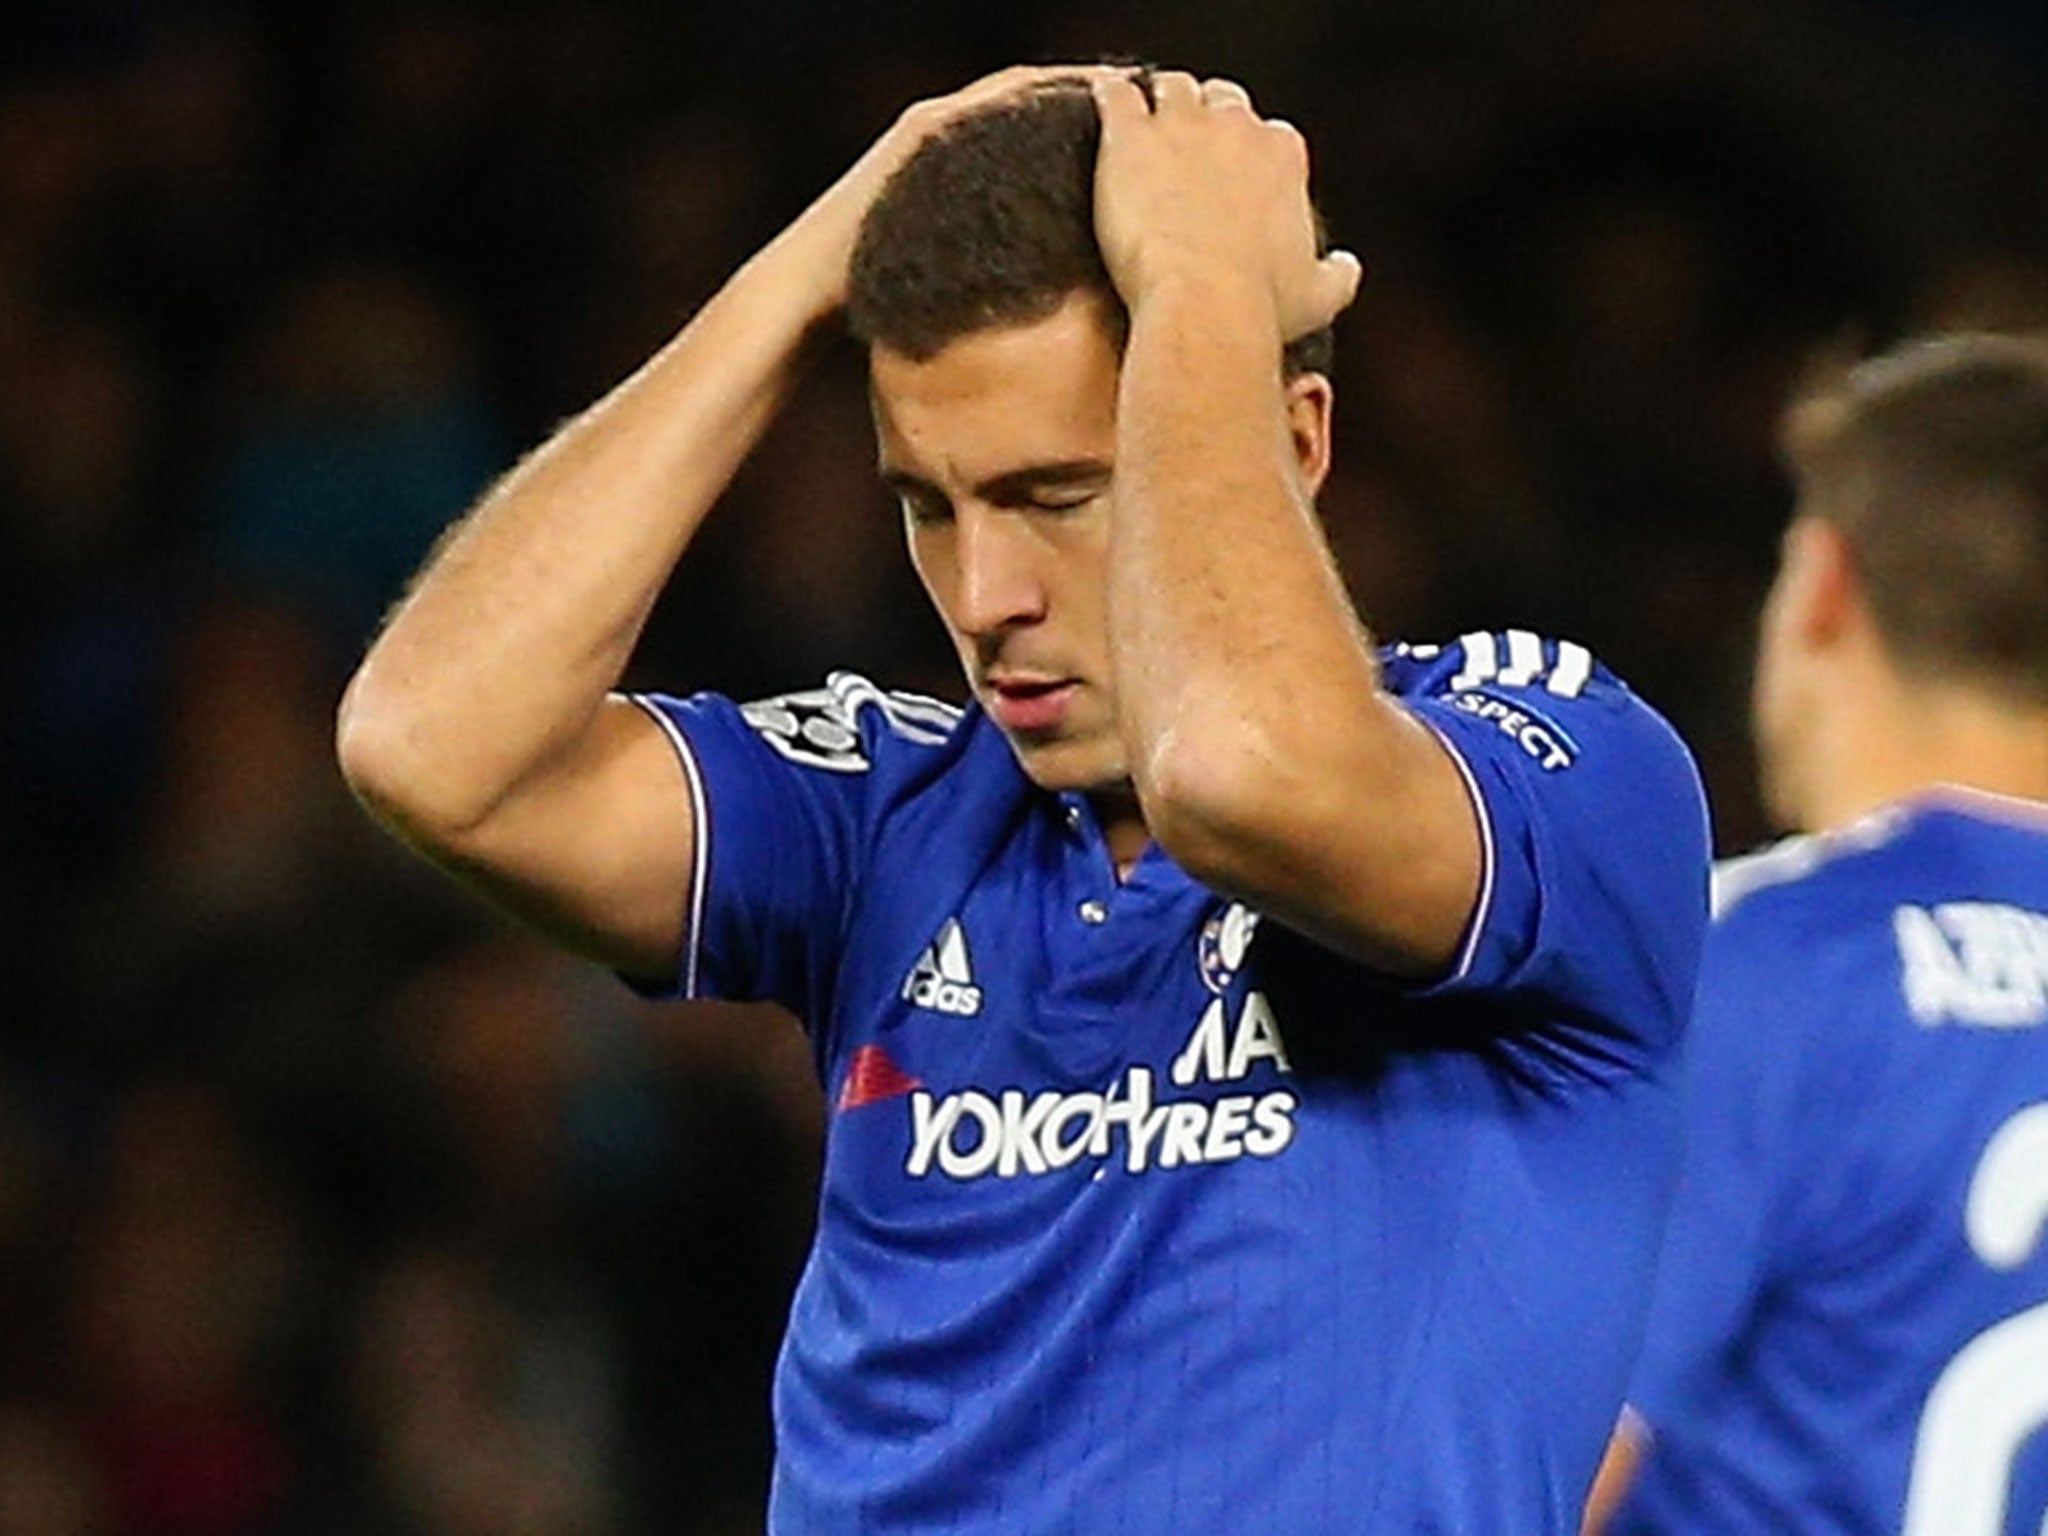 Eden Hazard reacts after missing a penalty in the Champions League